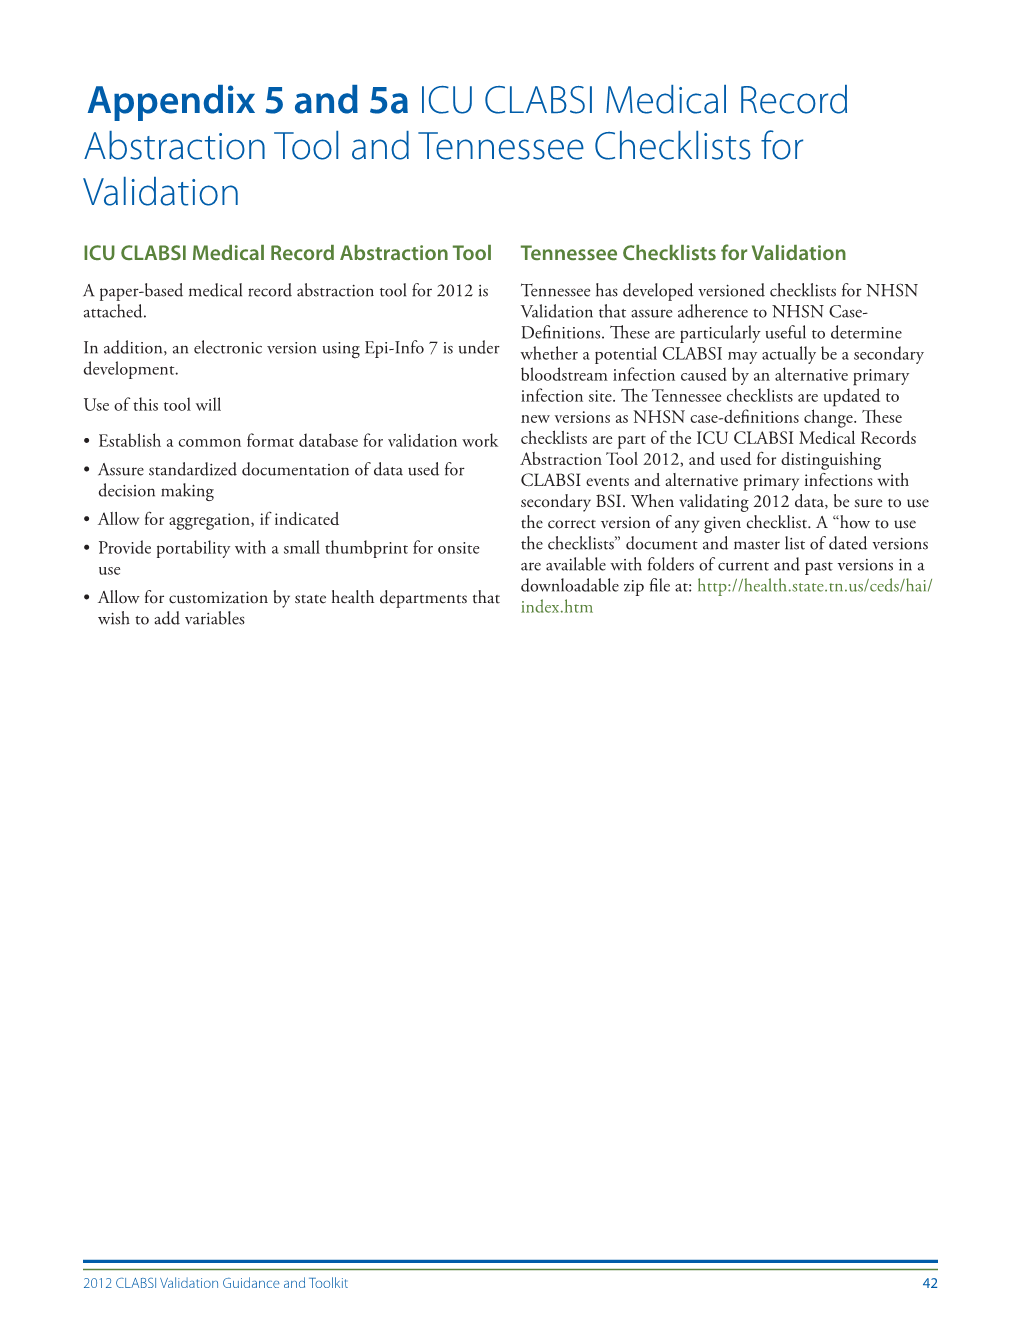 Appendix 5 and 5A ICU CLABSI Medical Record Abstraction Tool and Tennessee Checklists for Validation